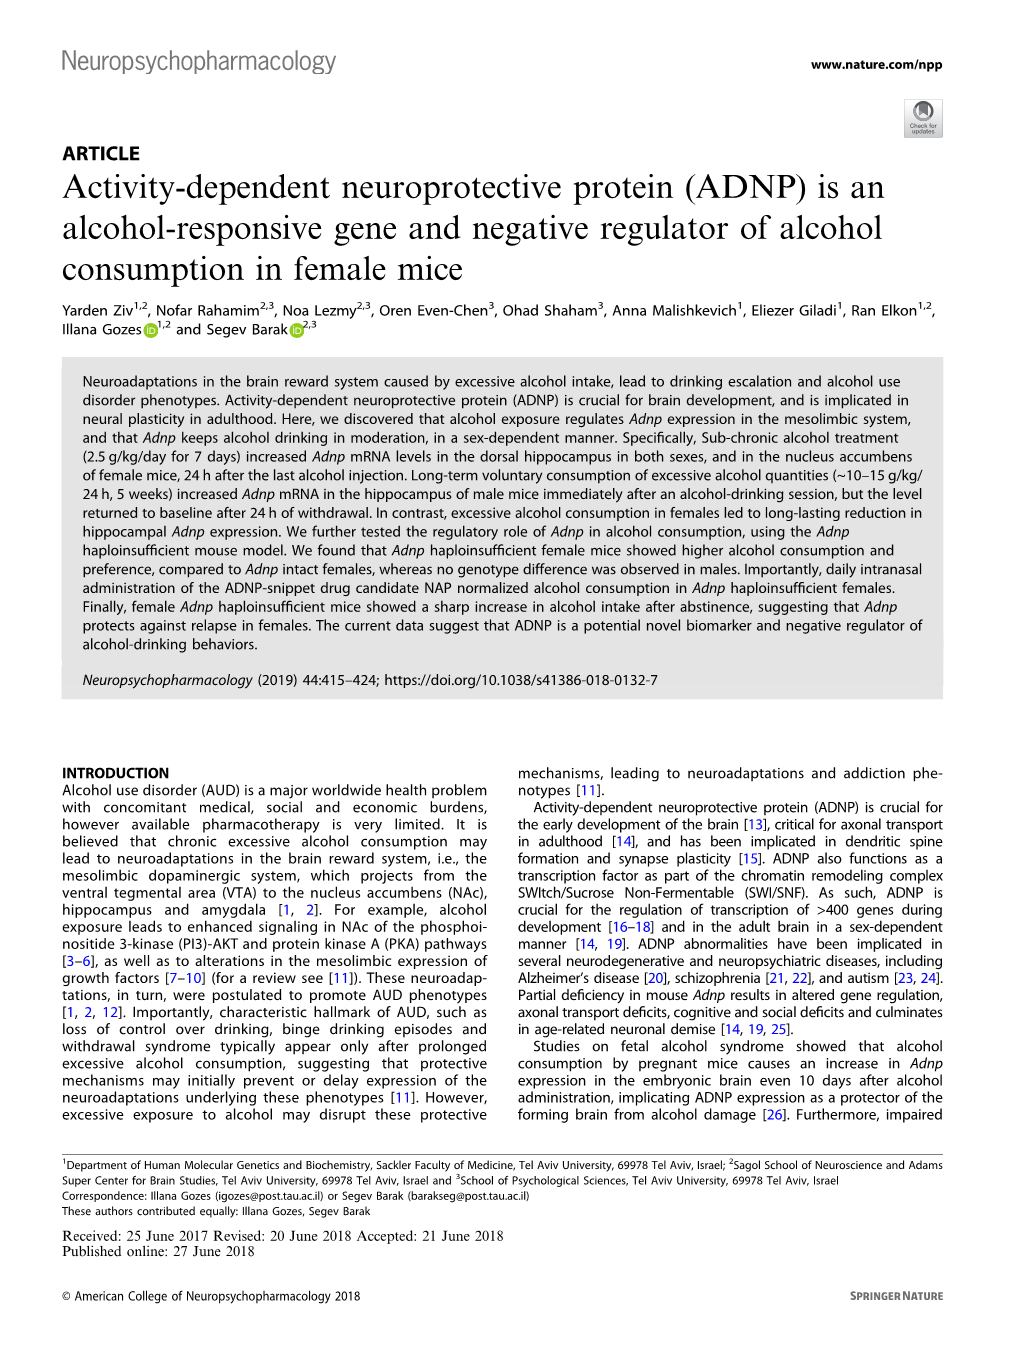 Activity-Dependent Neuroprotective Protein (ADNP) Is an Alcohol-Responsive Gene and Negative Regulator of Alcohol Consumption in Female Mice